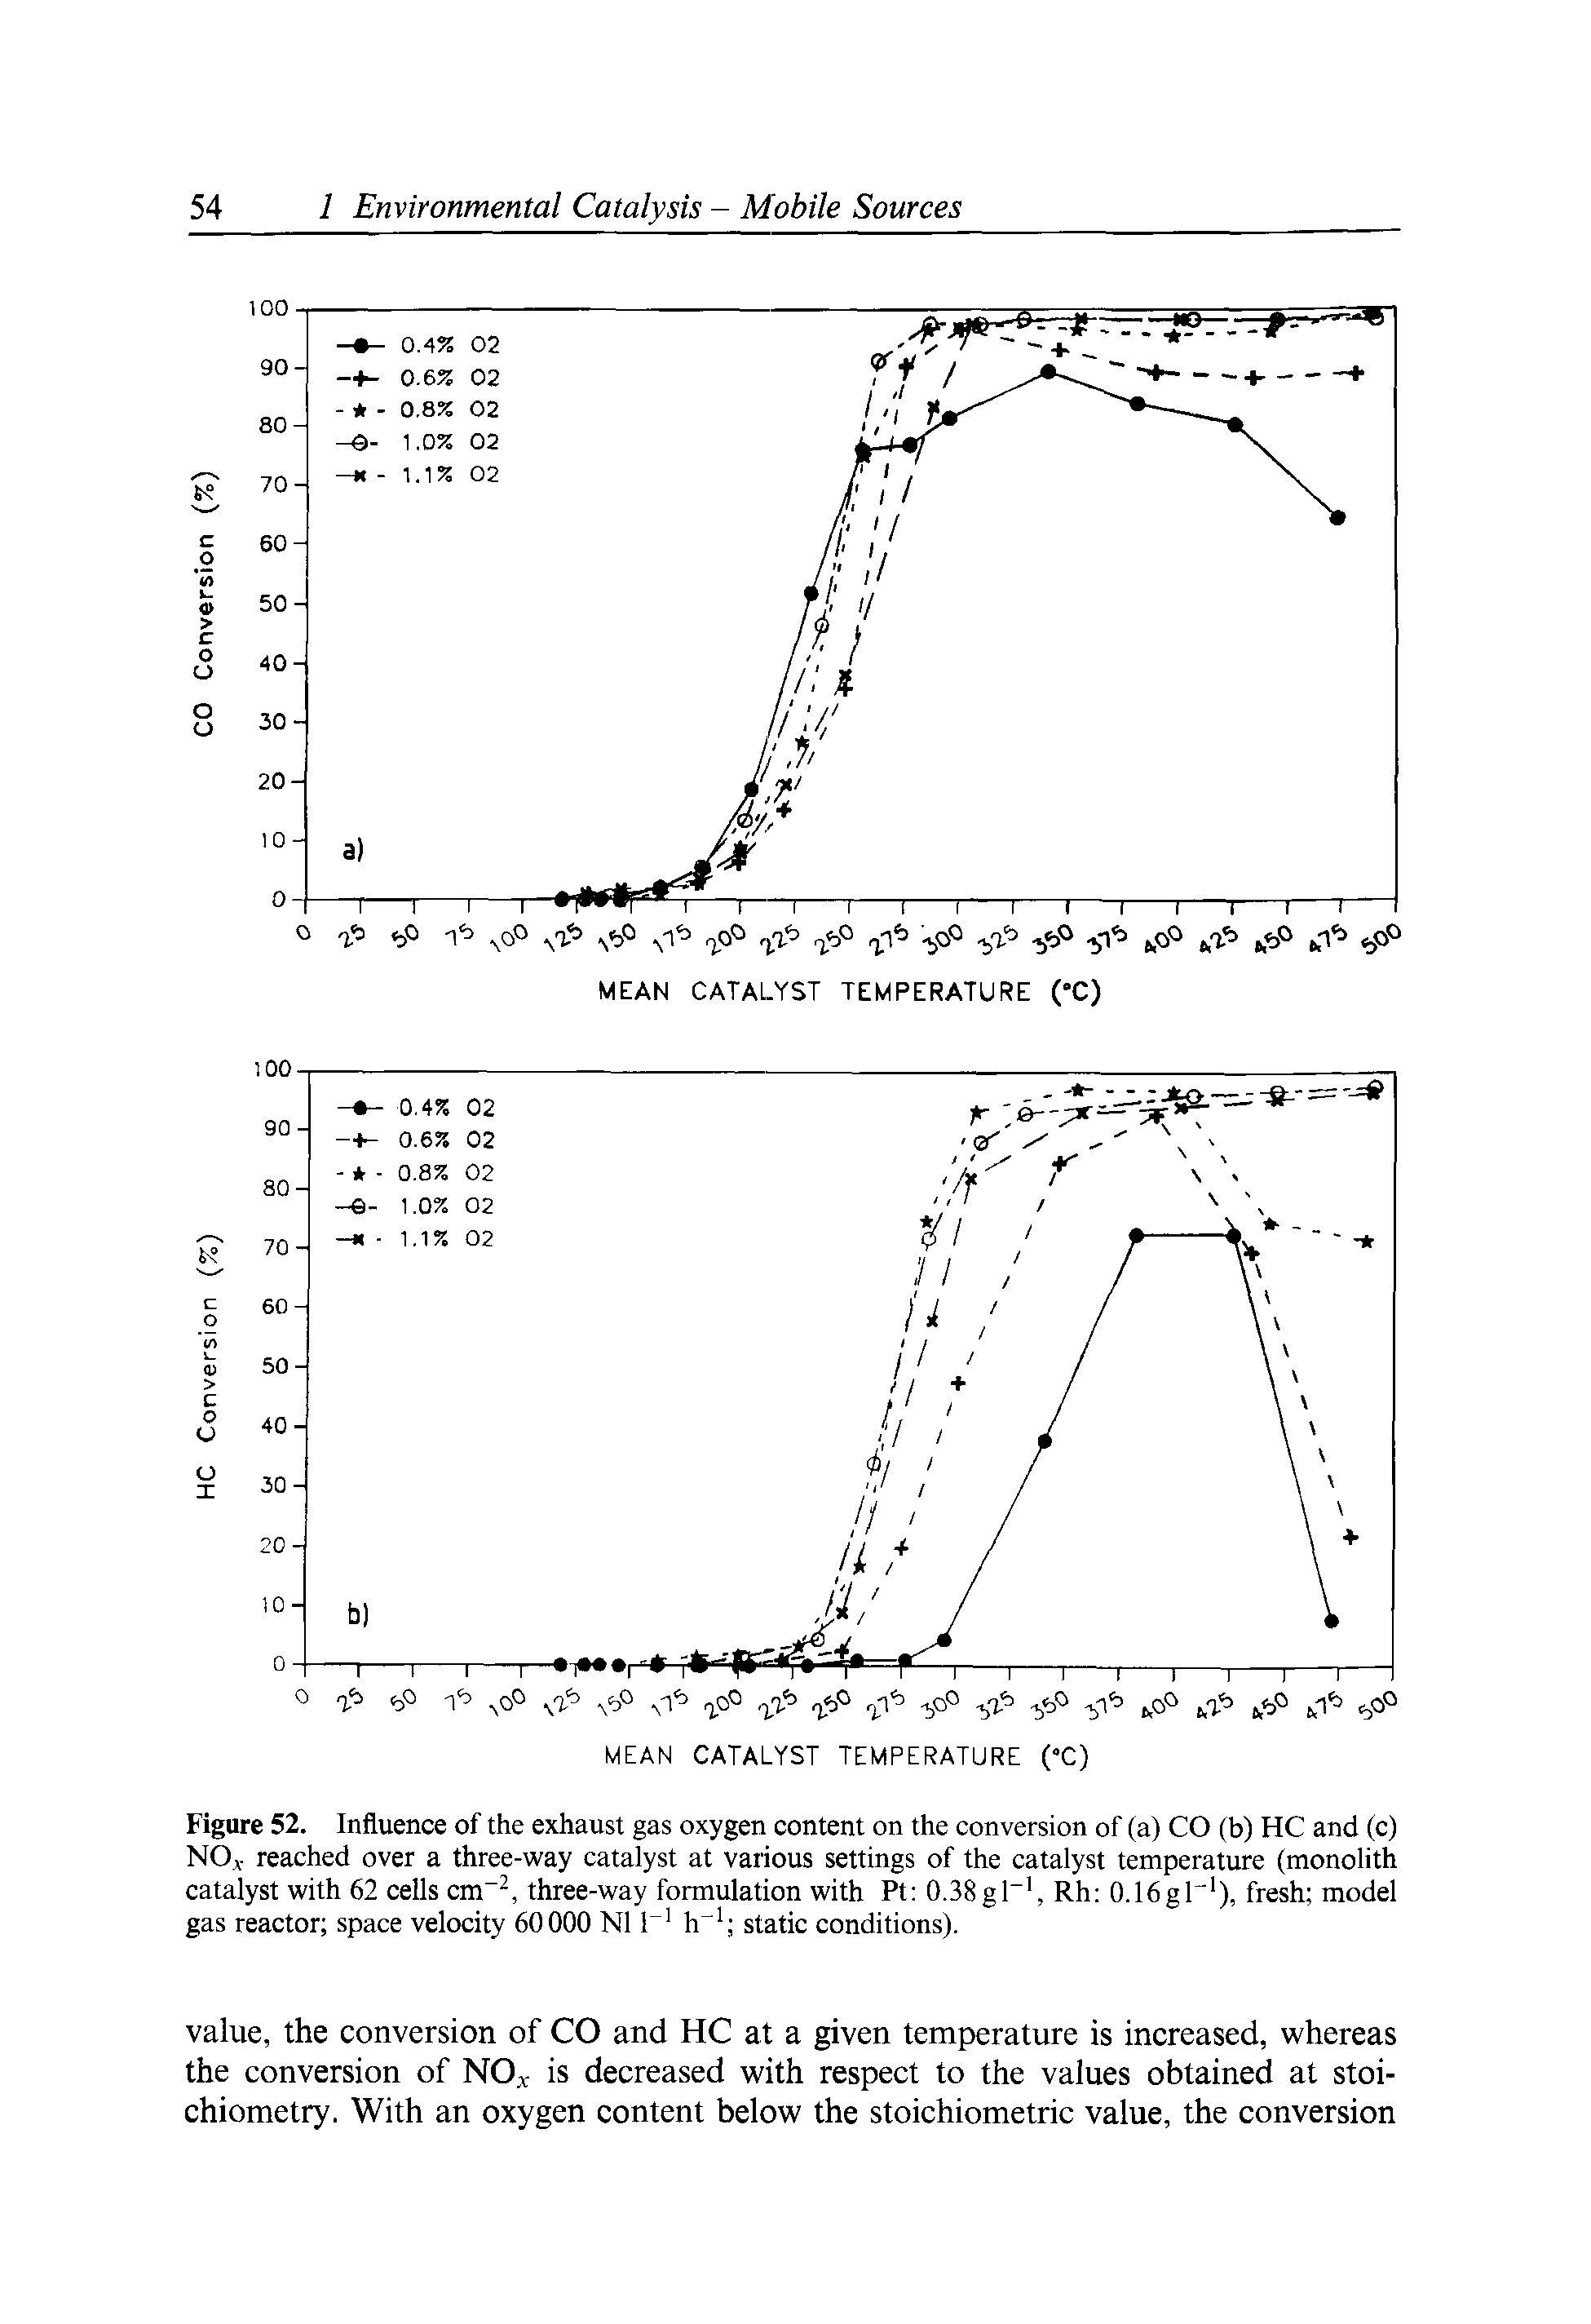 Figure 52. Influence of the exhaust gas oxygen content on the conversion of (a) CO (b) HC and (c) NOjt reached over a three-way catalyst at various settings of the catalyst temperature (monolith catalyst with 62 cells cm , three-way formulation with Pt 0.38gl , Rh 0.16gC ), fresh model gas reactor space velocity 60000 Nil h static conditions).